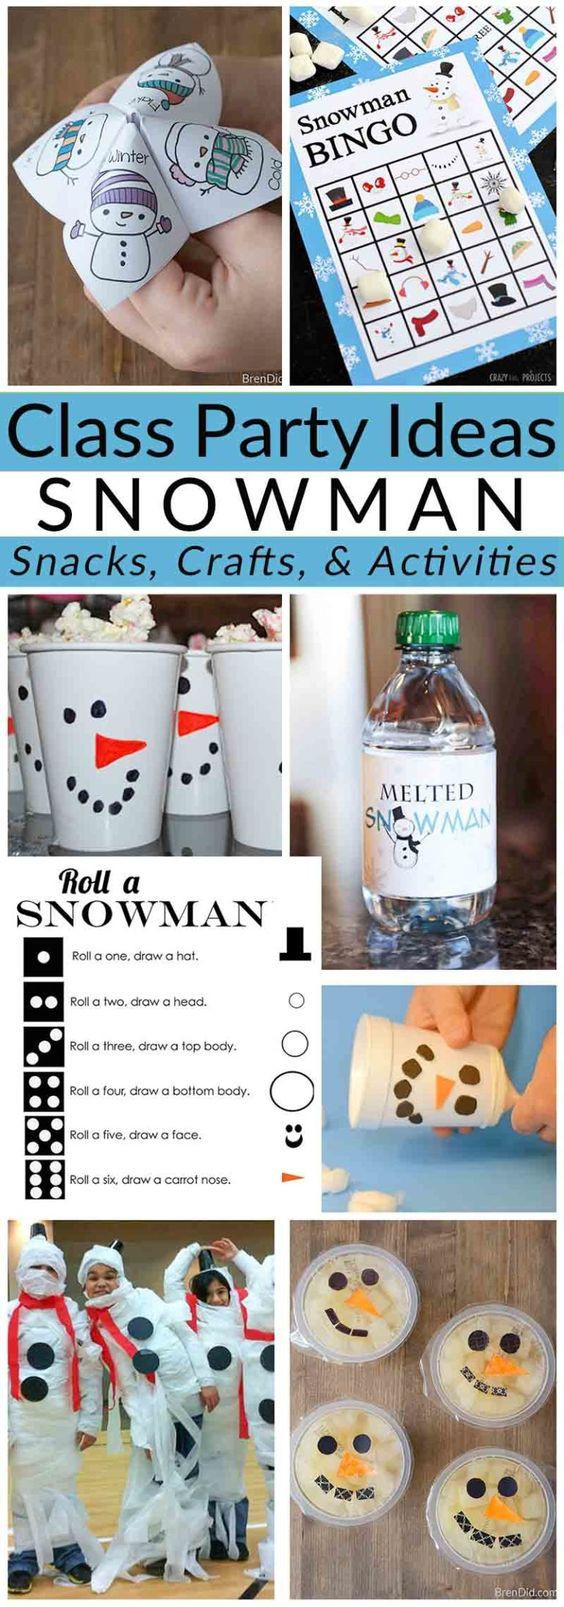 Elementary School Christmas Party Ideas
 Class Party Ideas Winter Snowman Party